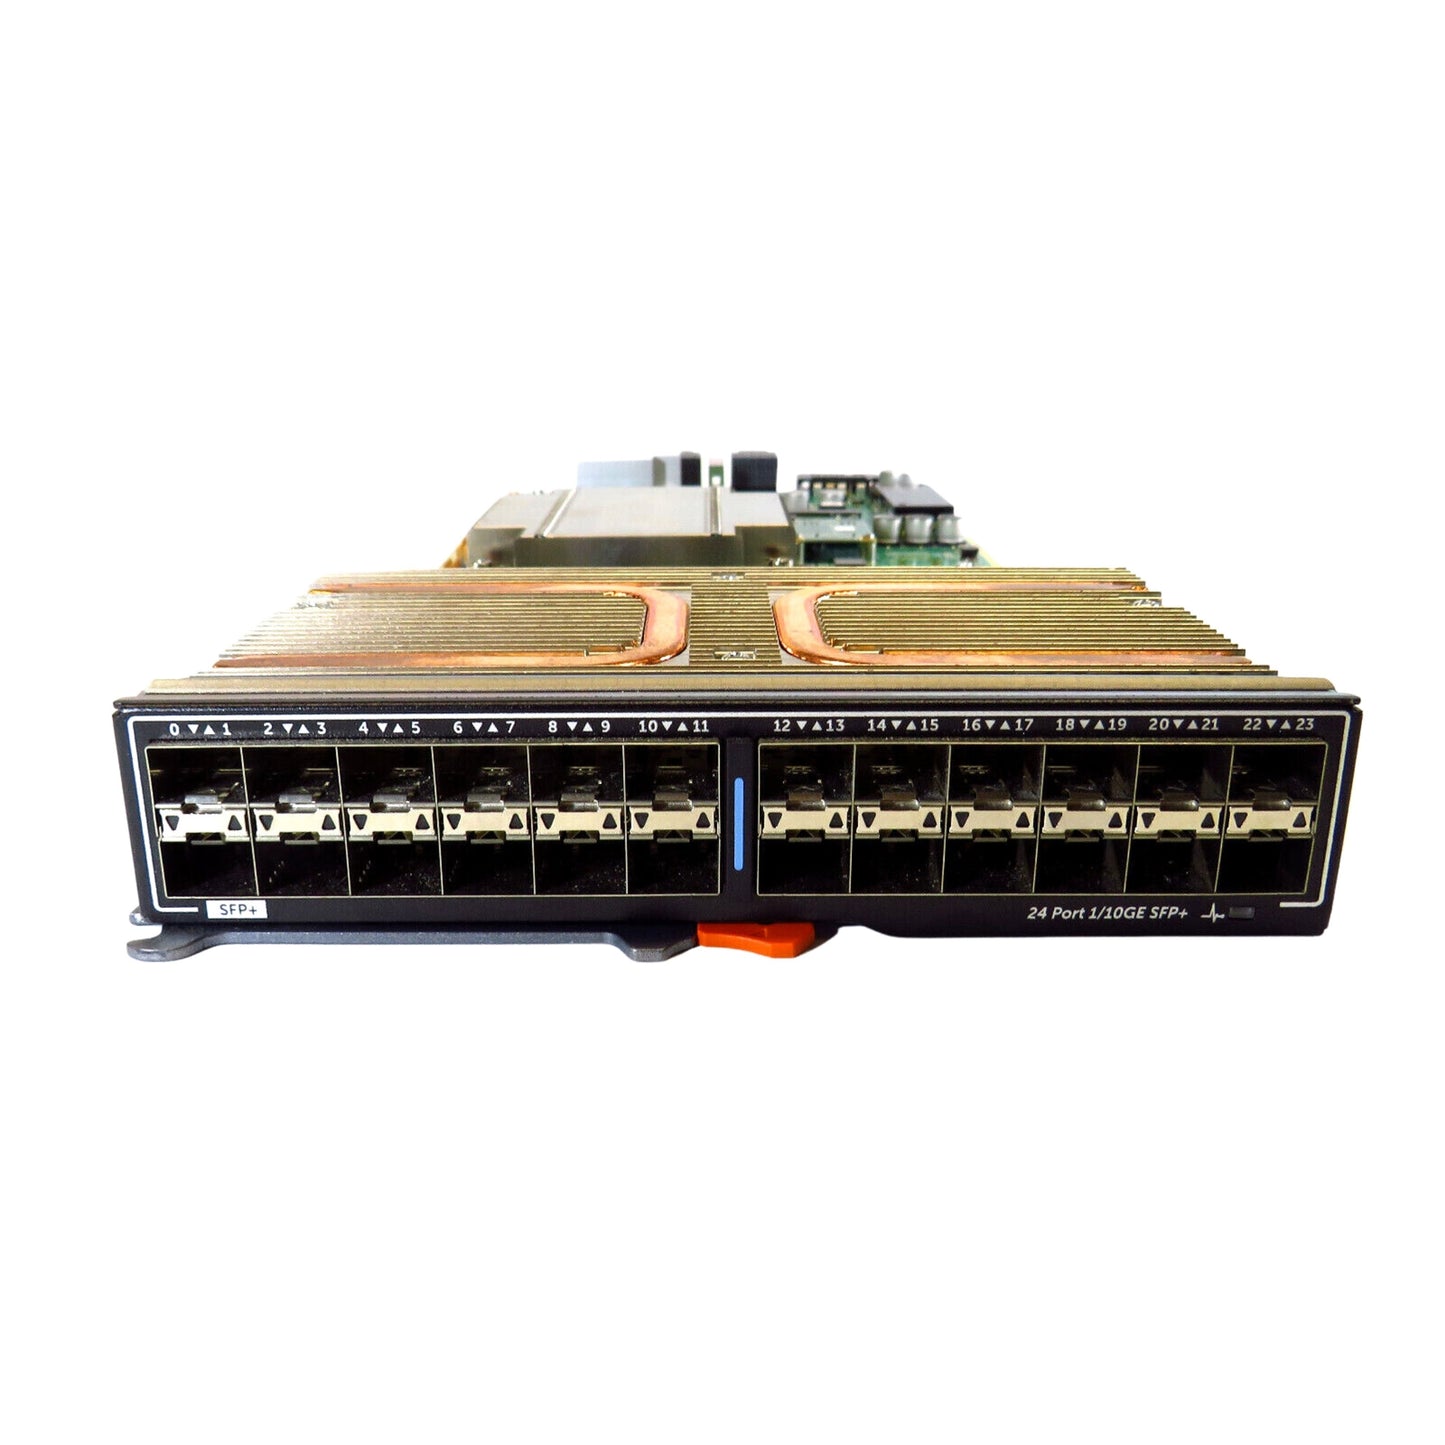 Dell 4D4GD 24 Port 1/10GbE SFP+ Network Switch Module Line Card C9000 (Refurbished)